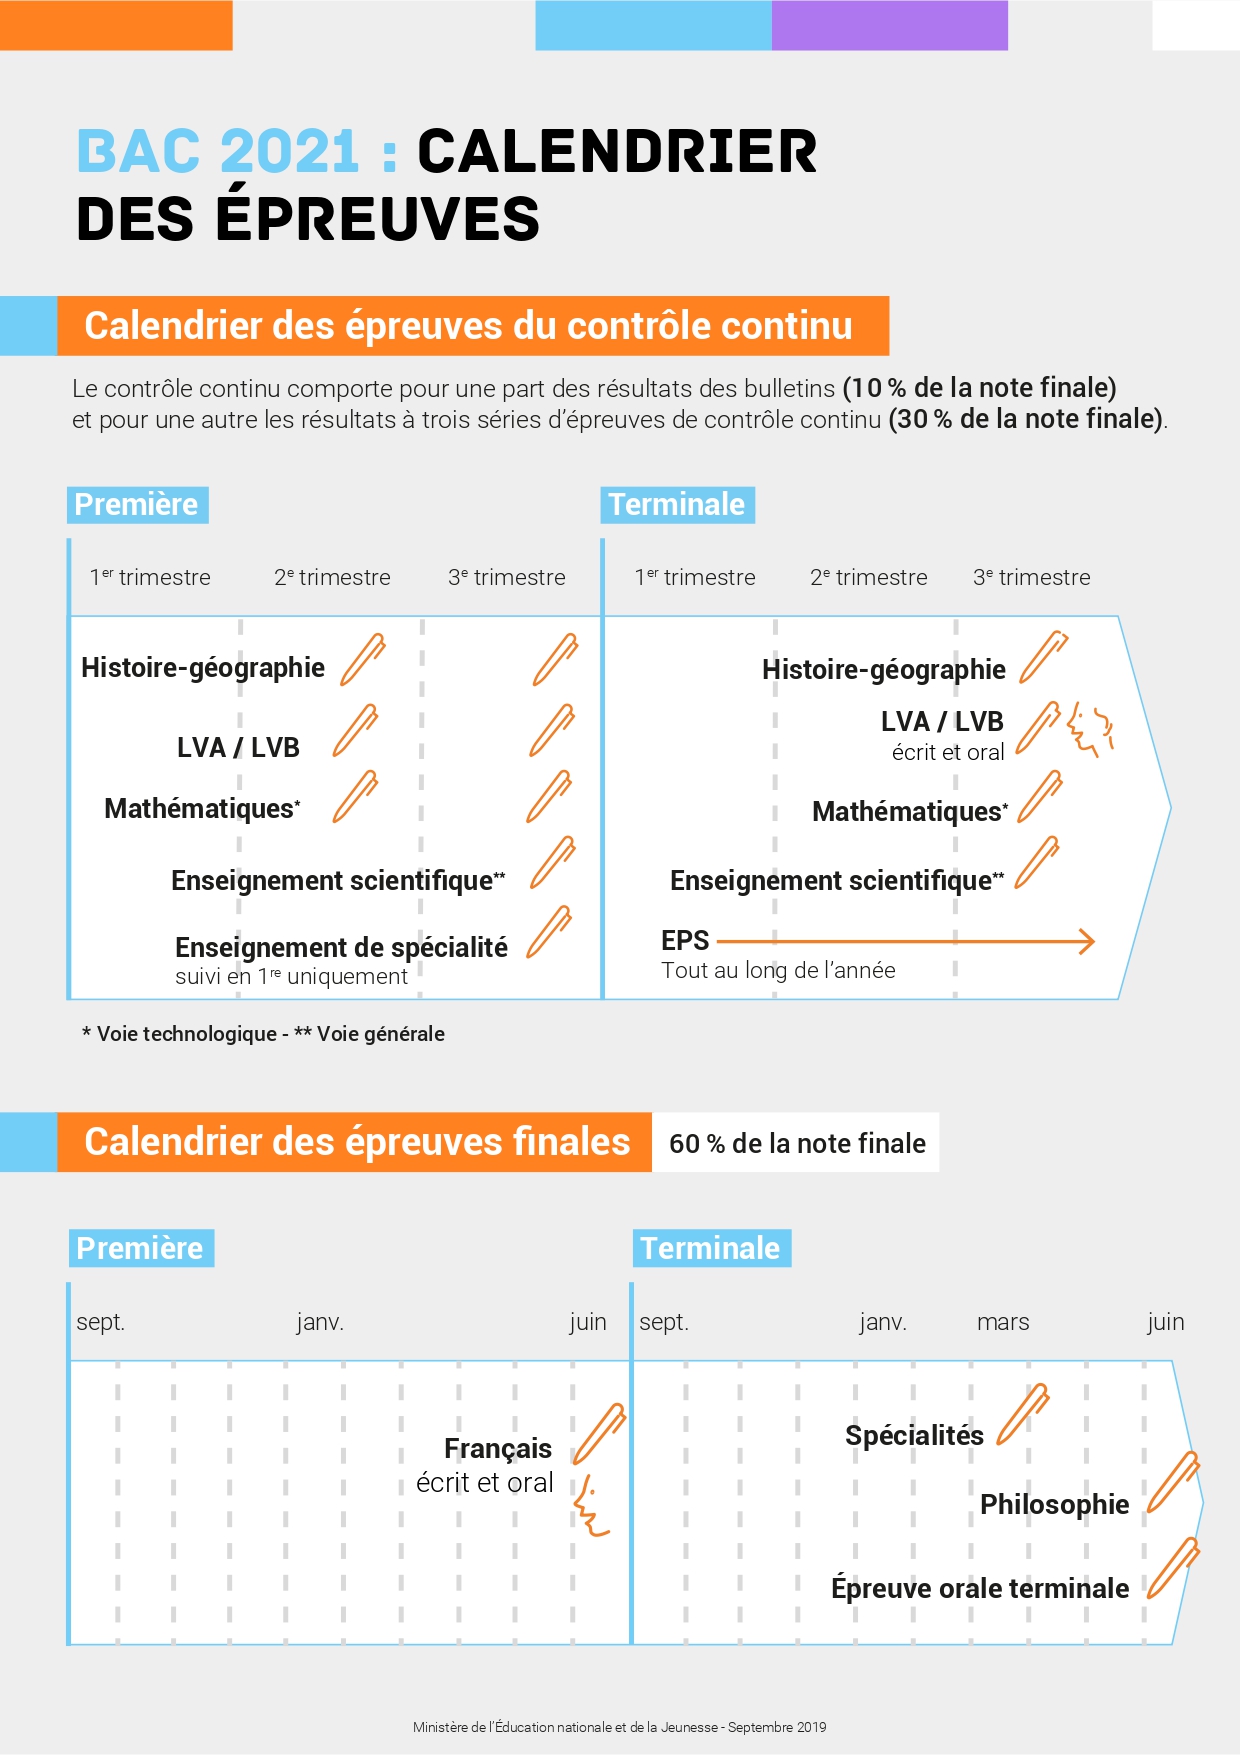 Epreuves calendrier duree BAC 2021 1 page 0001